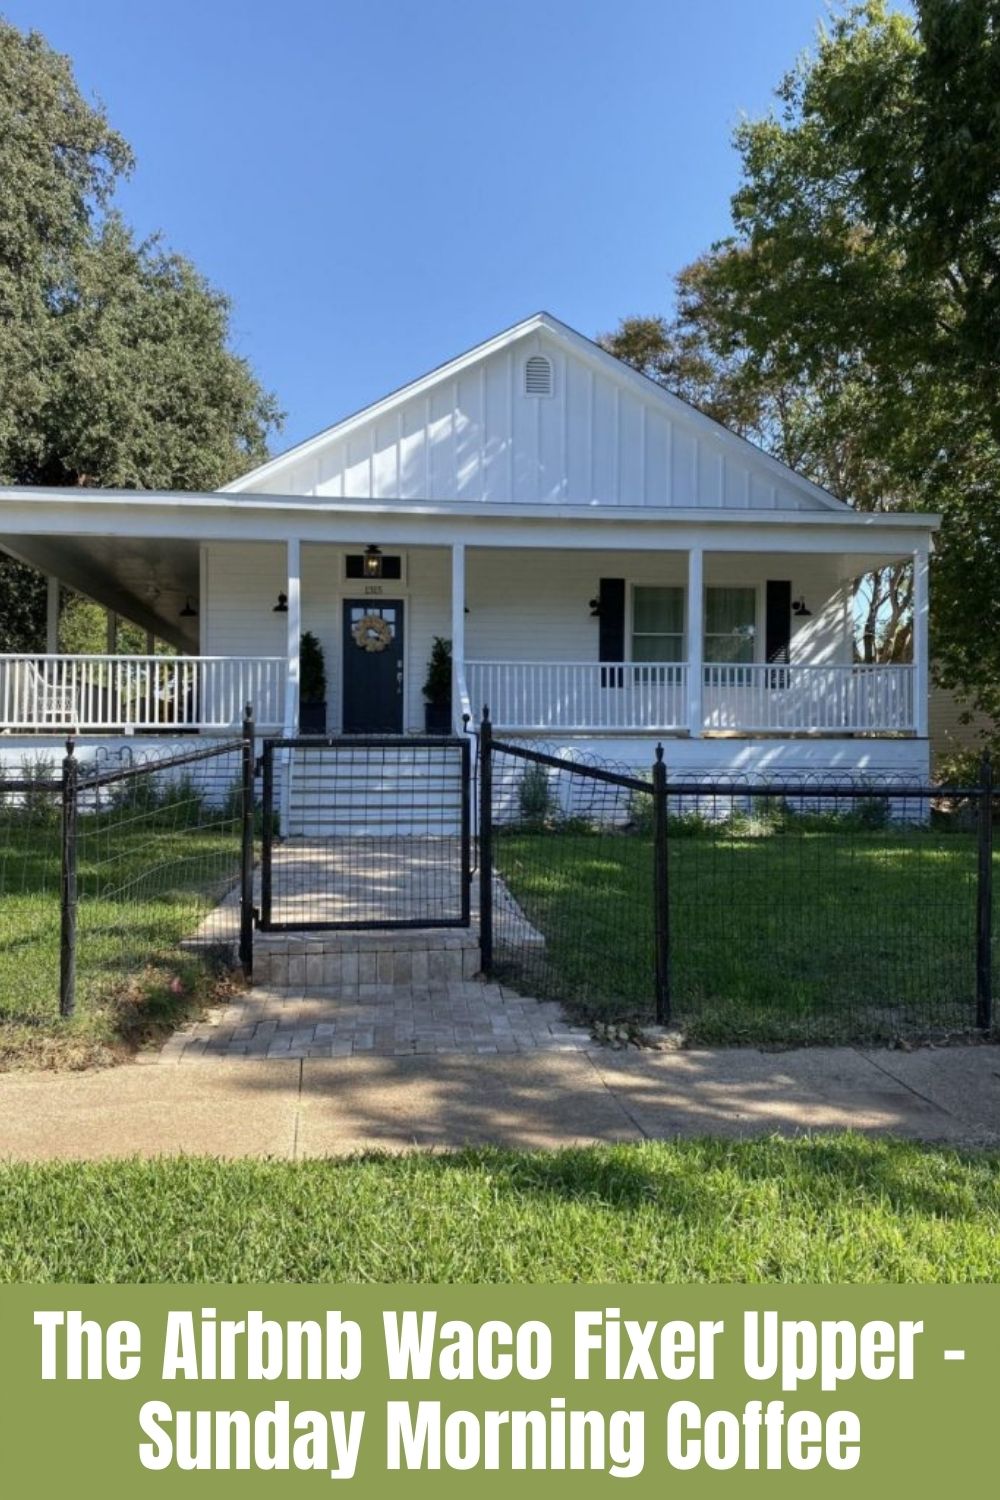 Today I am sharing how and why I bought our Airbnb Waco fixer upper. It has been the best remodel project and investment ever!